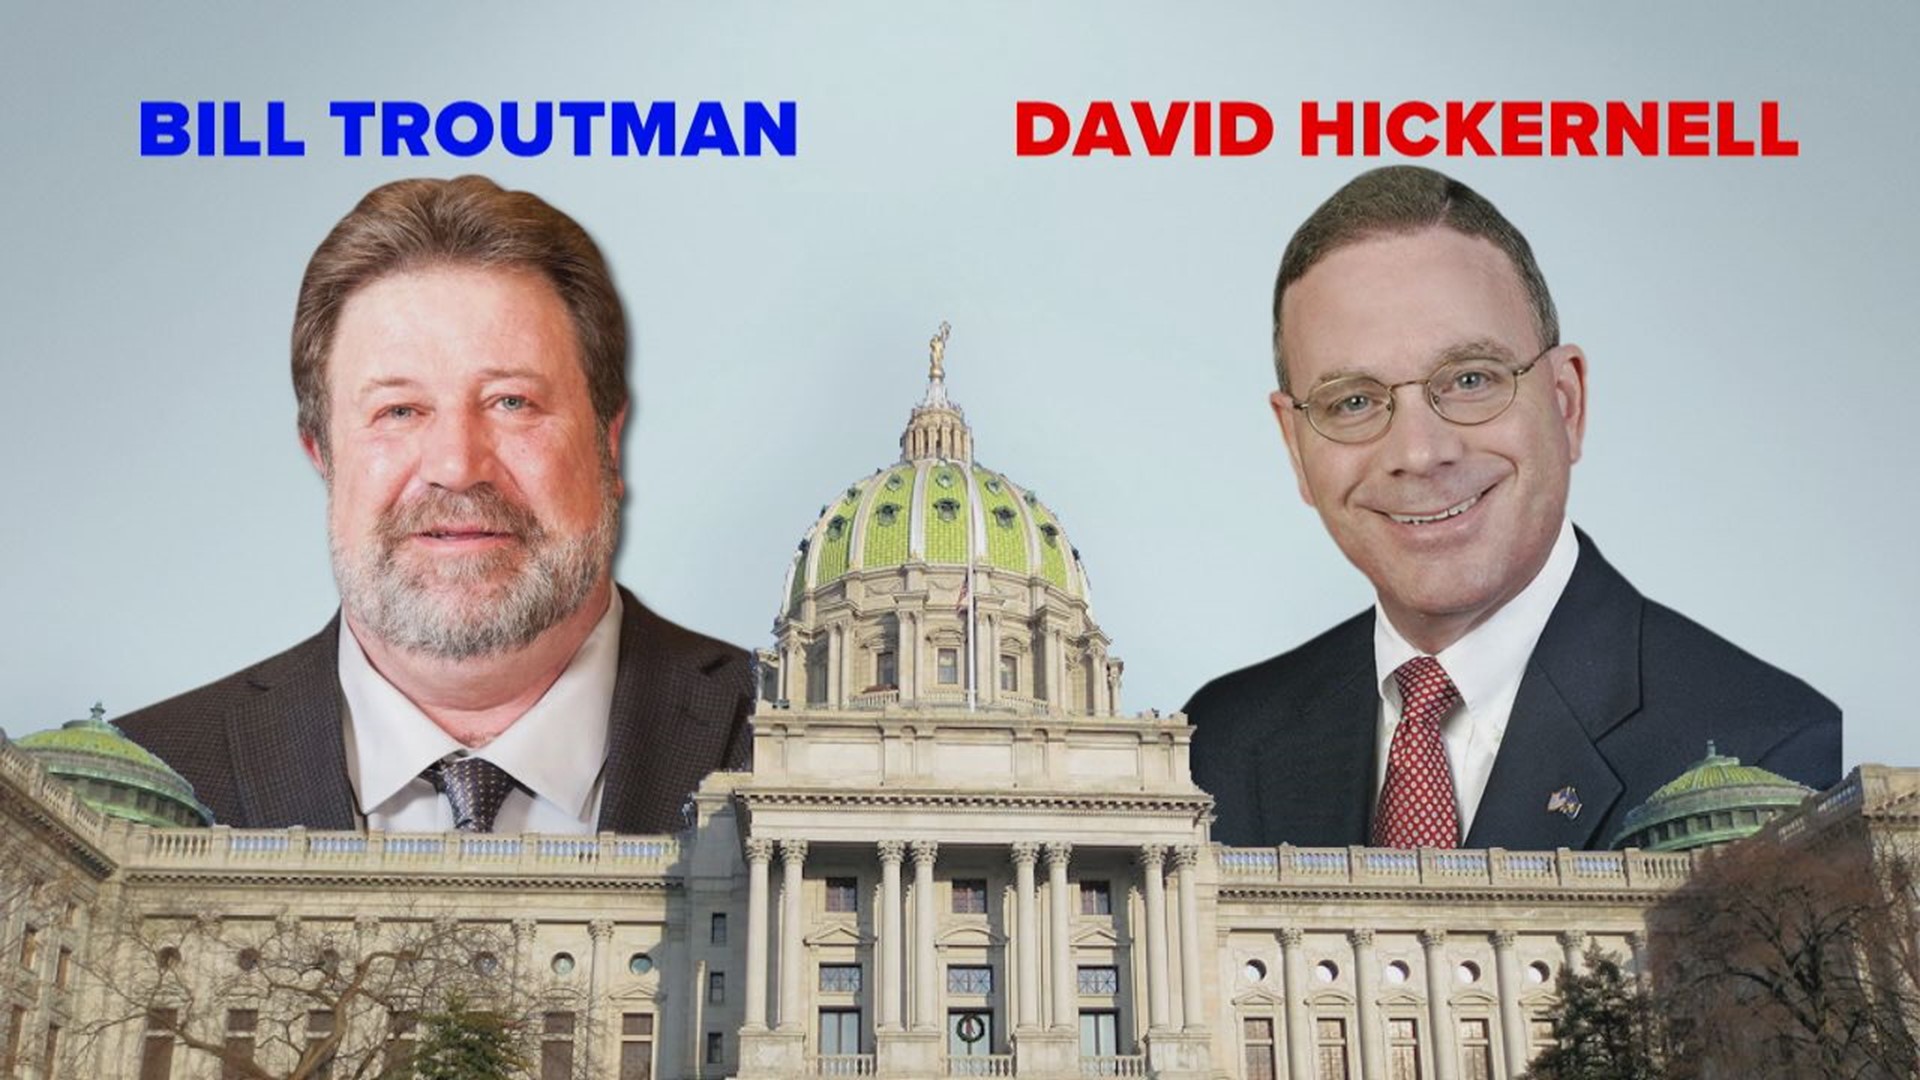 Hickernell is seeking a 10th term in the State House representing parts of southern Dauphin and northwestern Lancaster County.